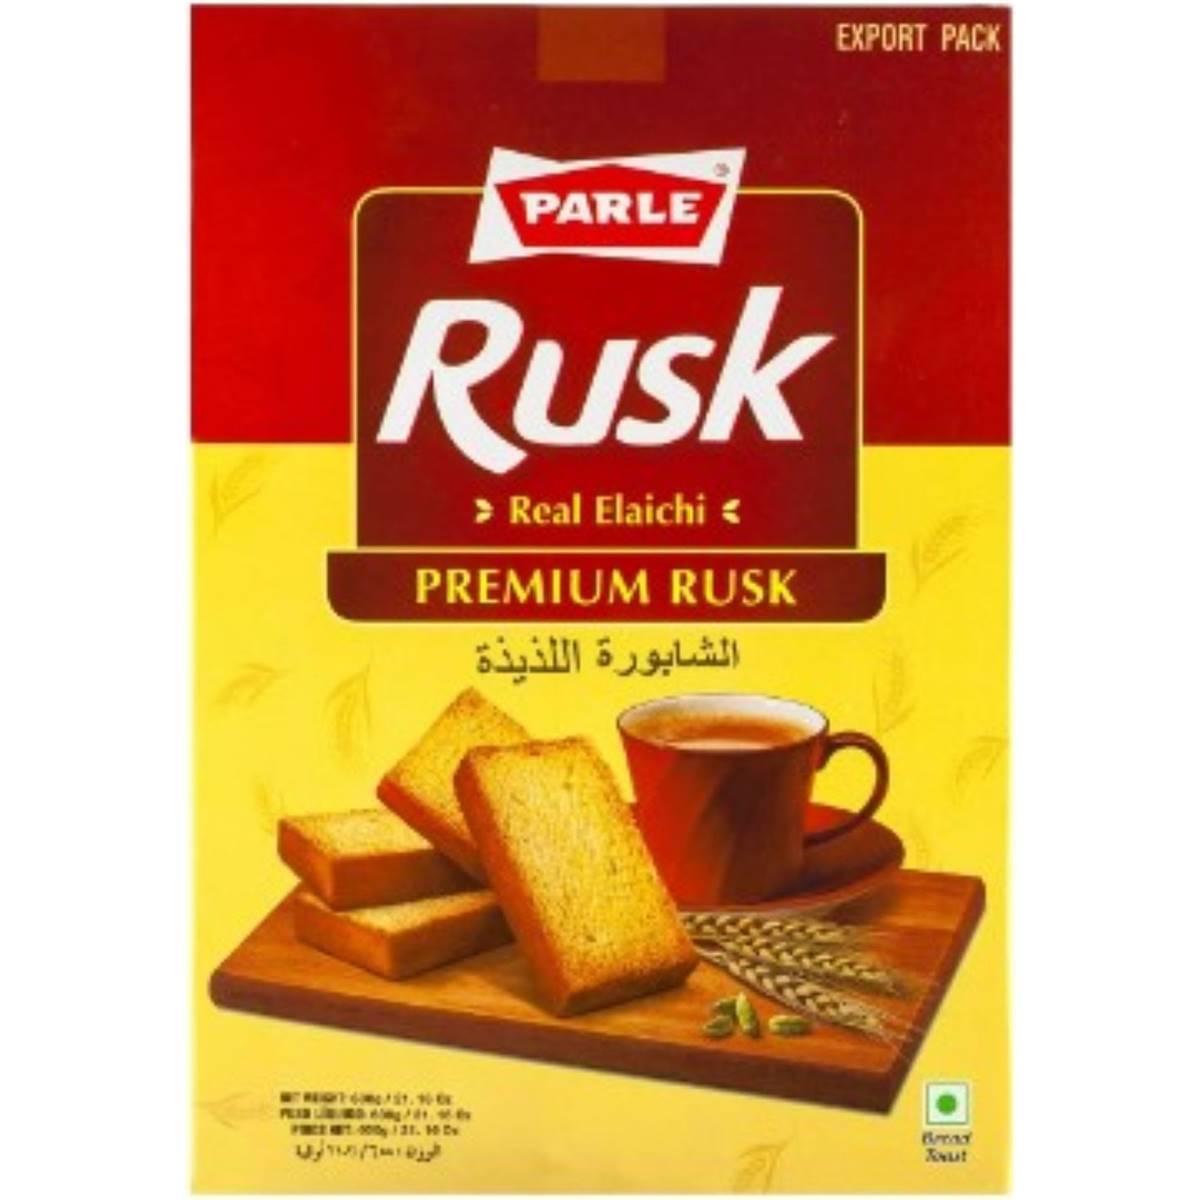 Calories in Parle Rusk.